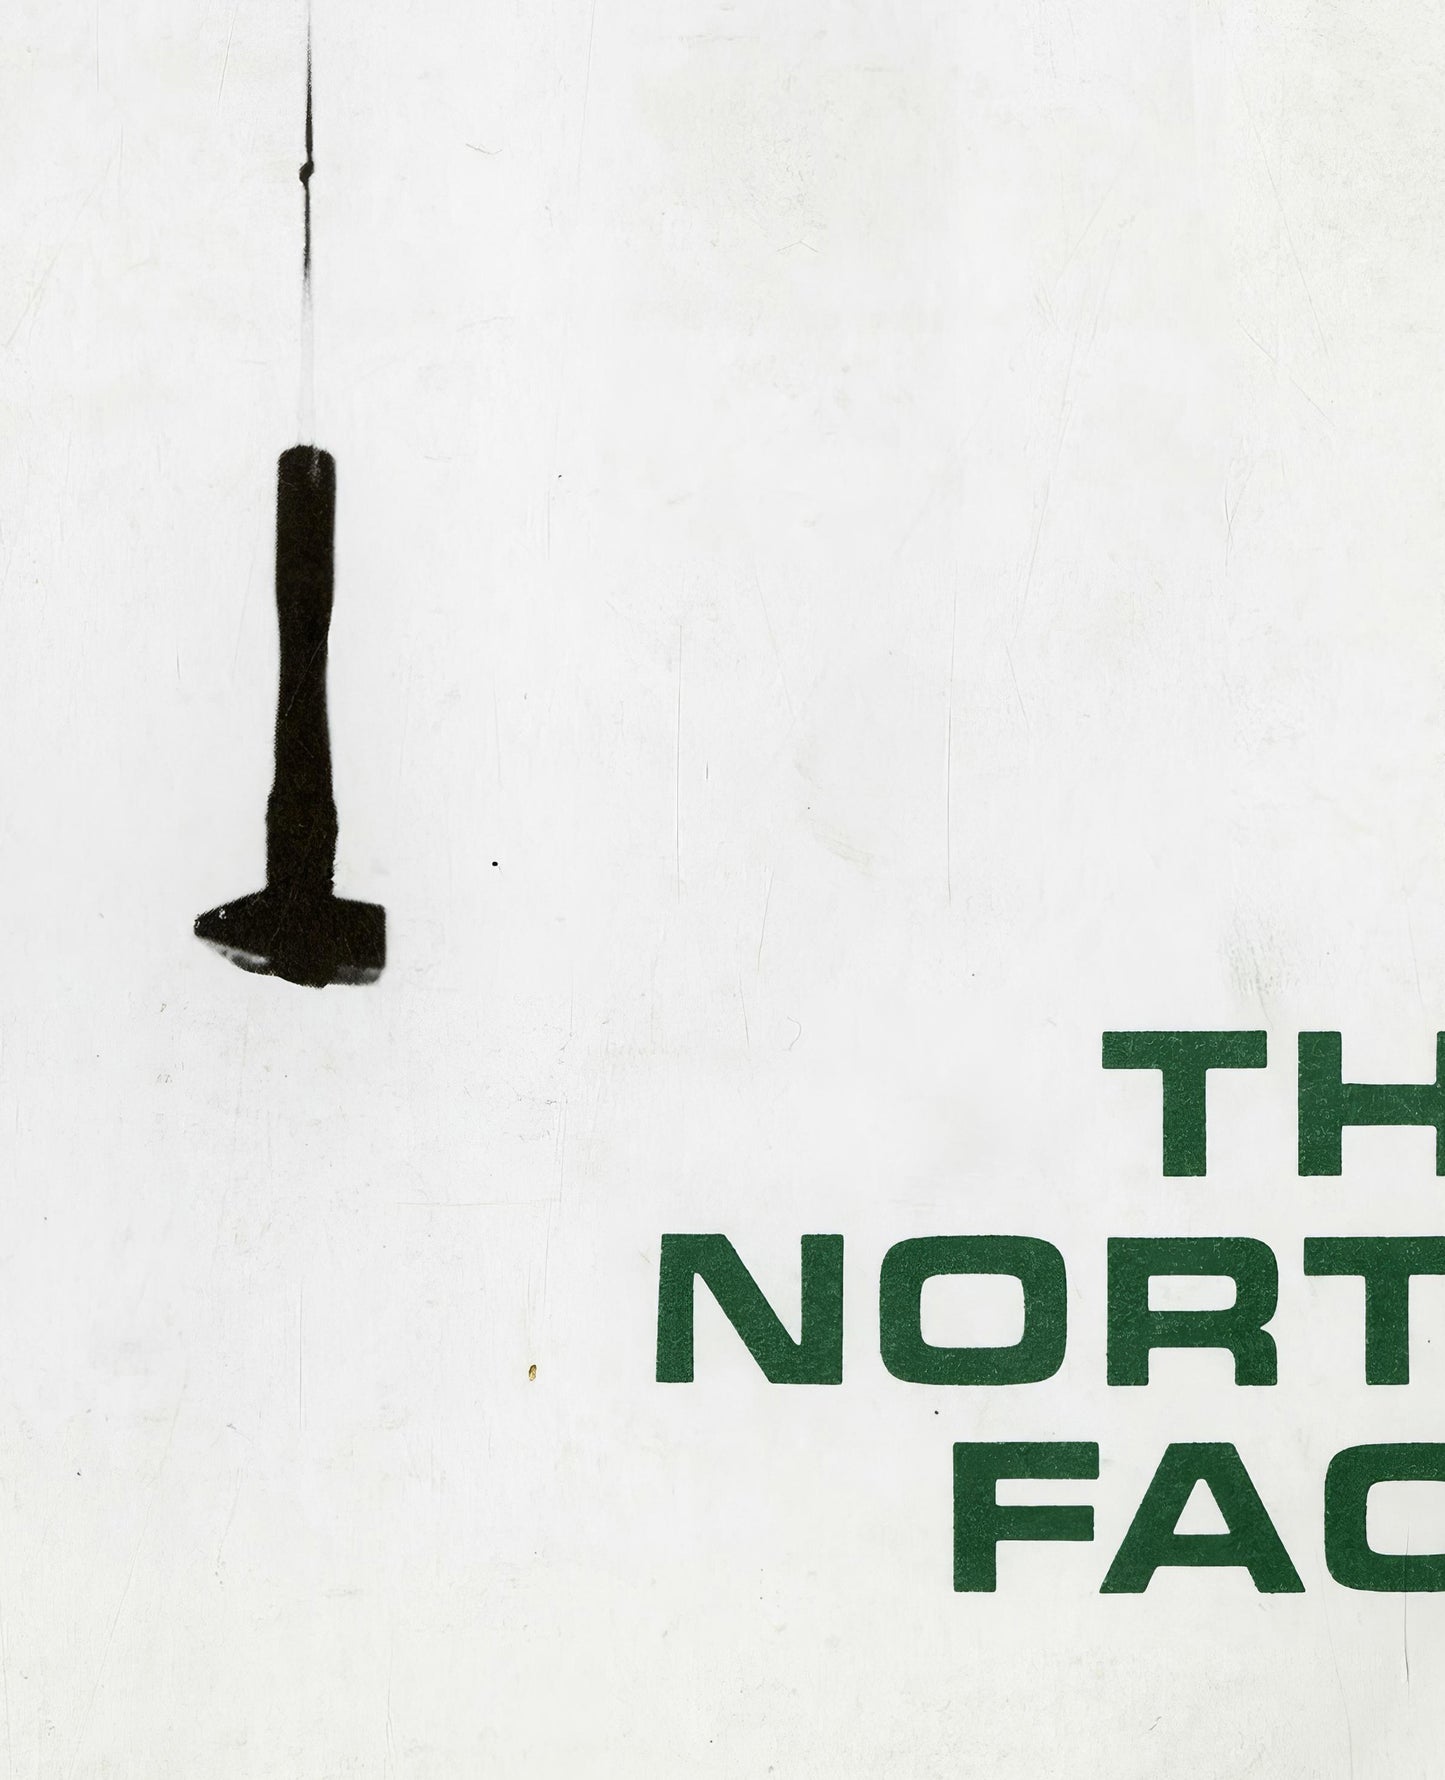 The North Face 1967 Magazine Front Cover Poster